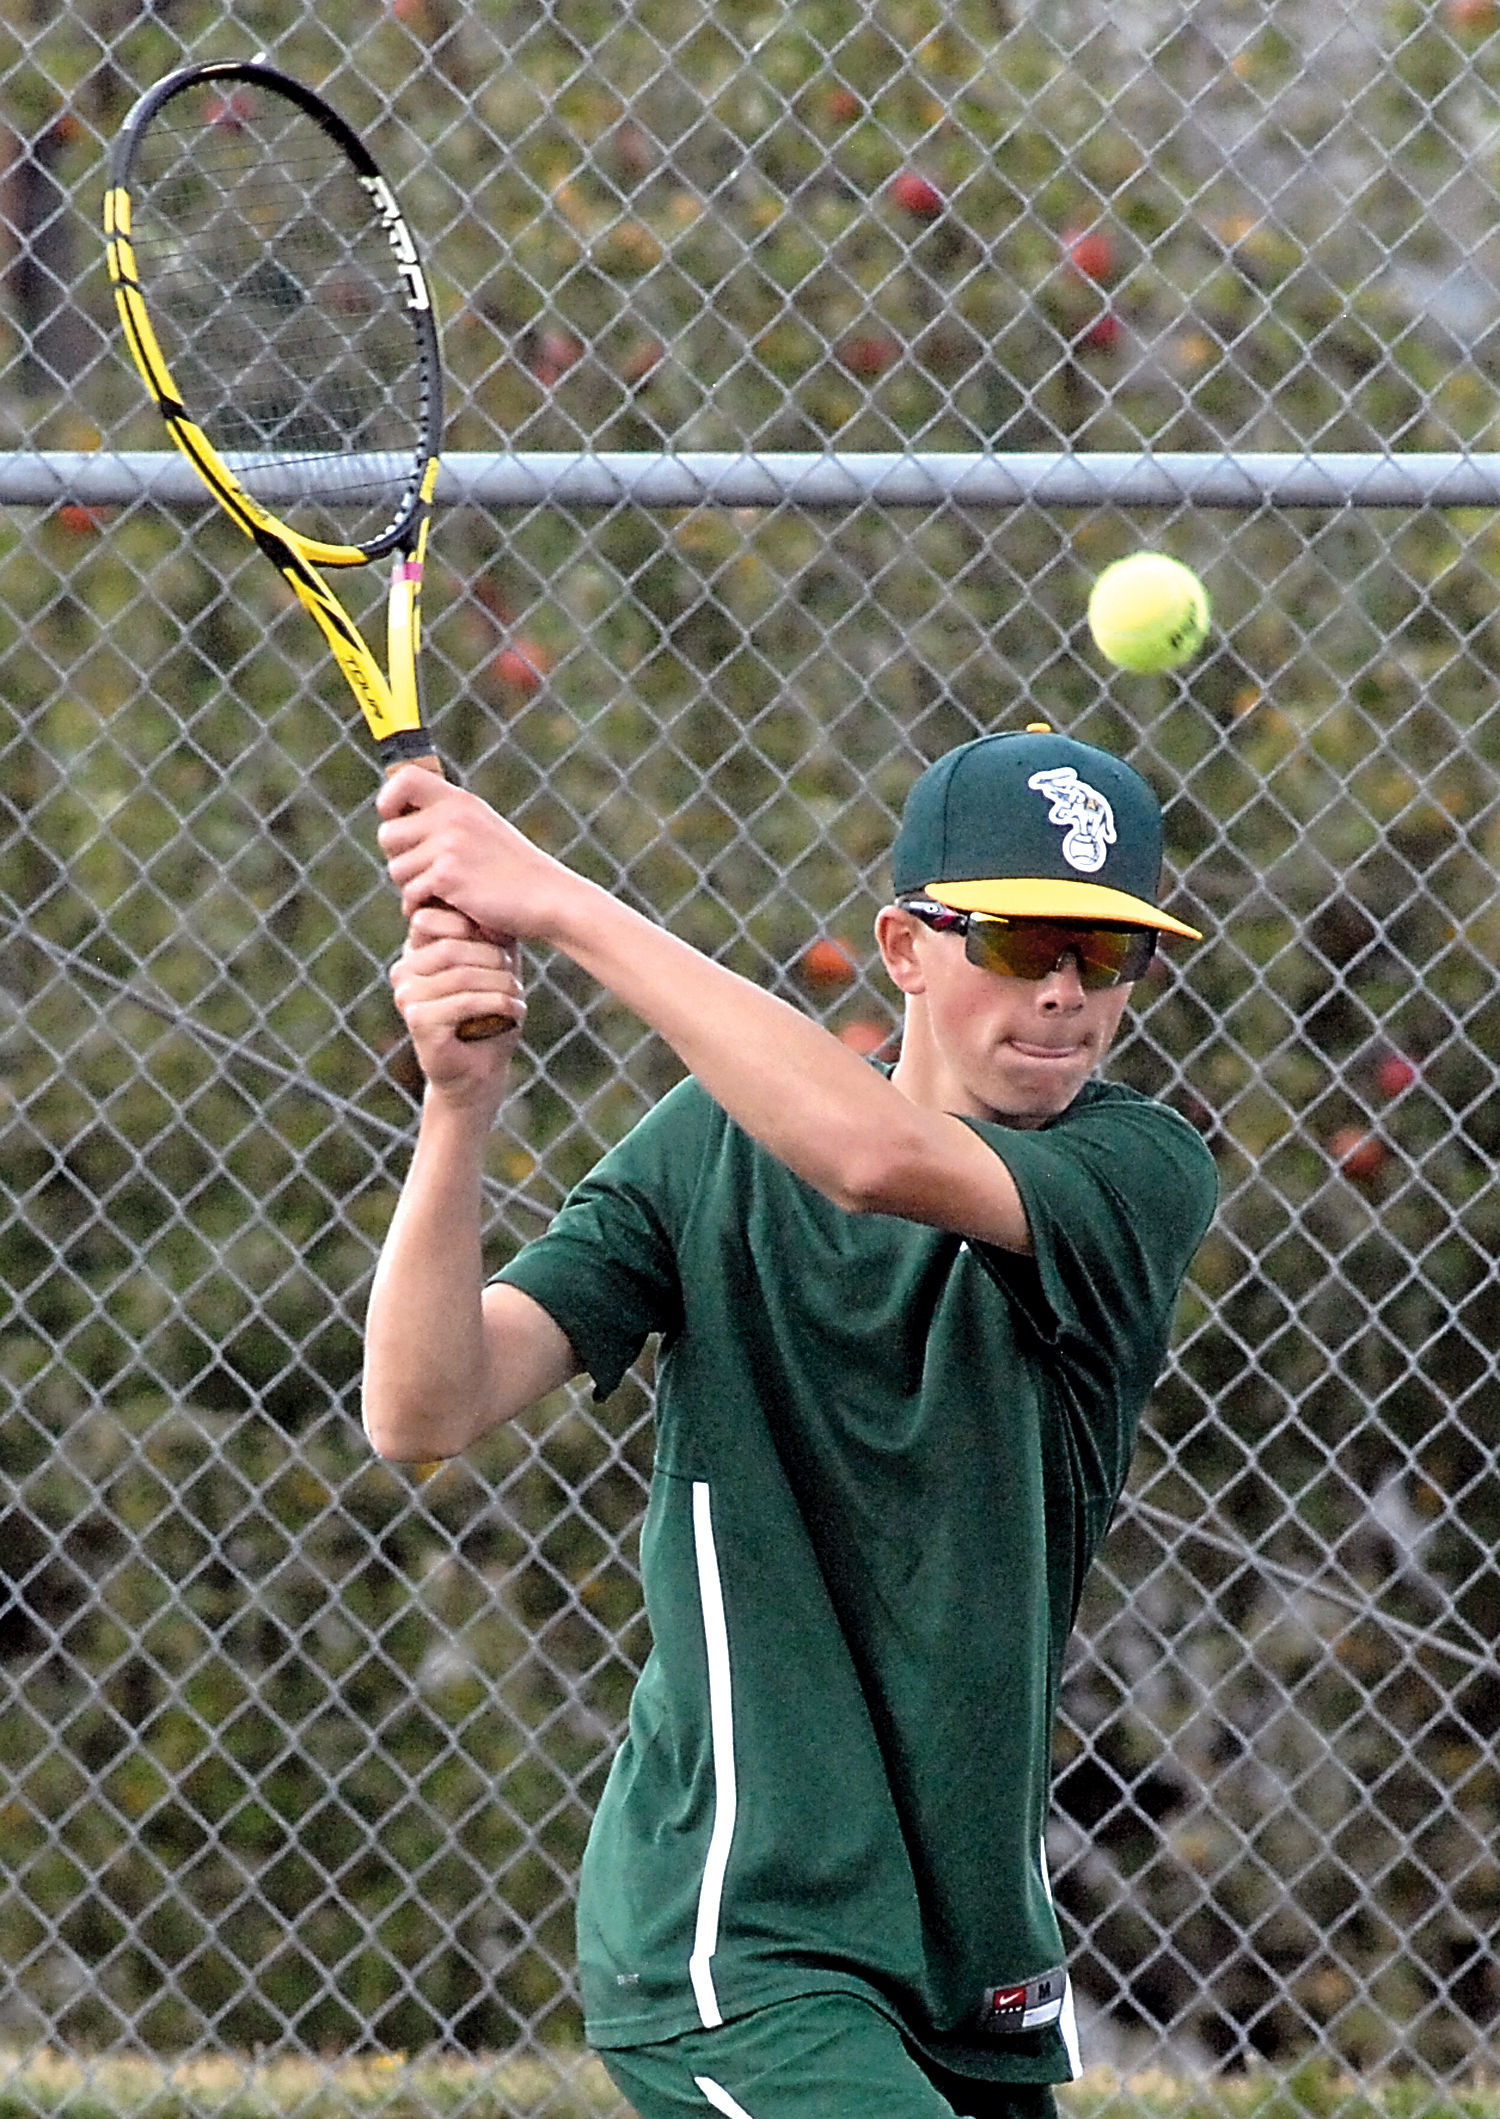 Port Angeles' Janson Pederson hits a return during his singles match against Kingston's Spencer Bowlus at Port Angeles High School. Keith Thorpe/Peninsula Daily News